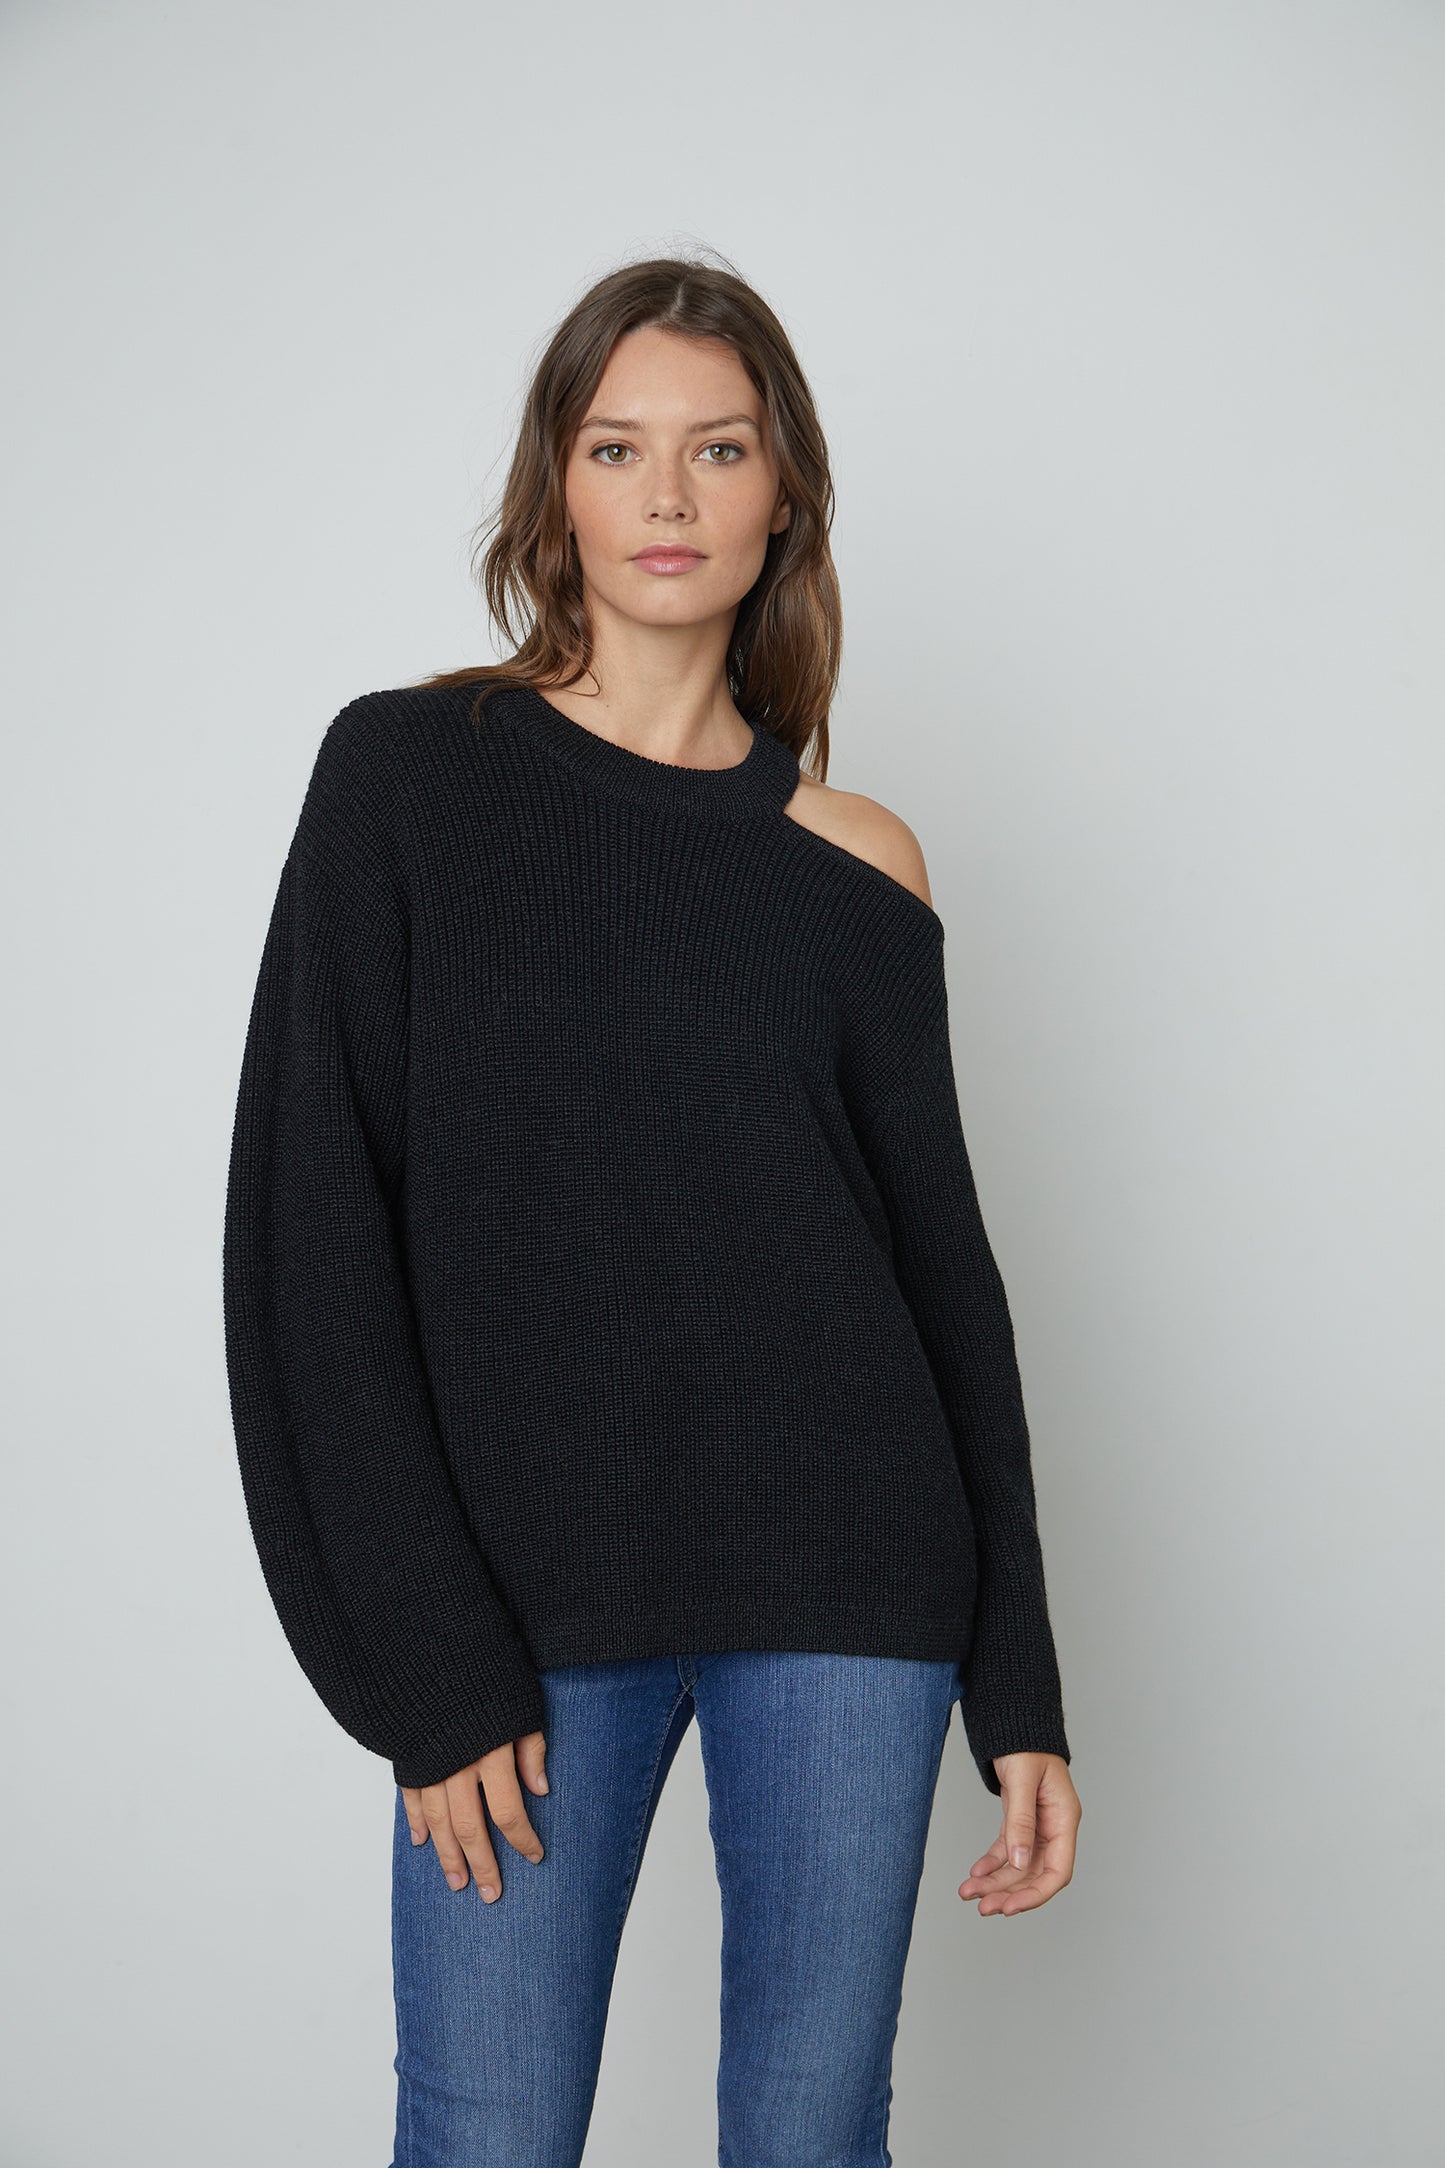 Elise Knit Top in Coal